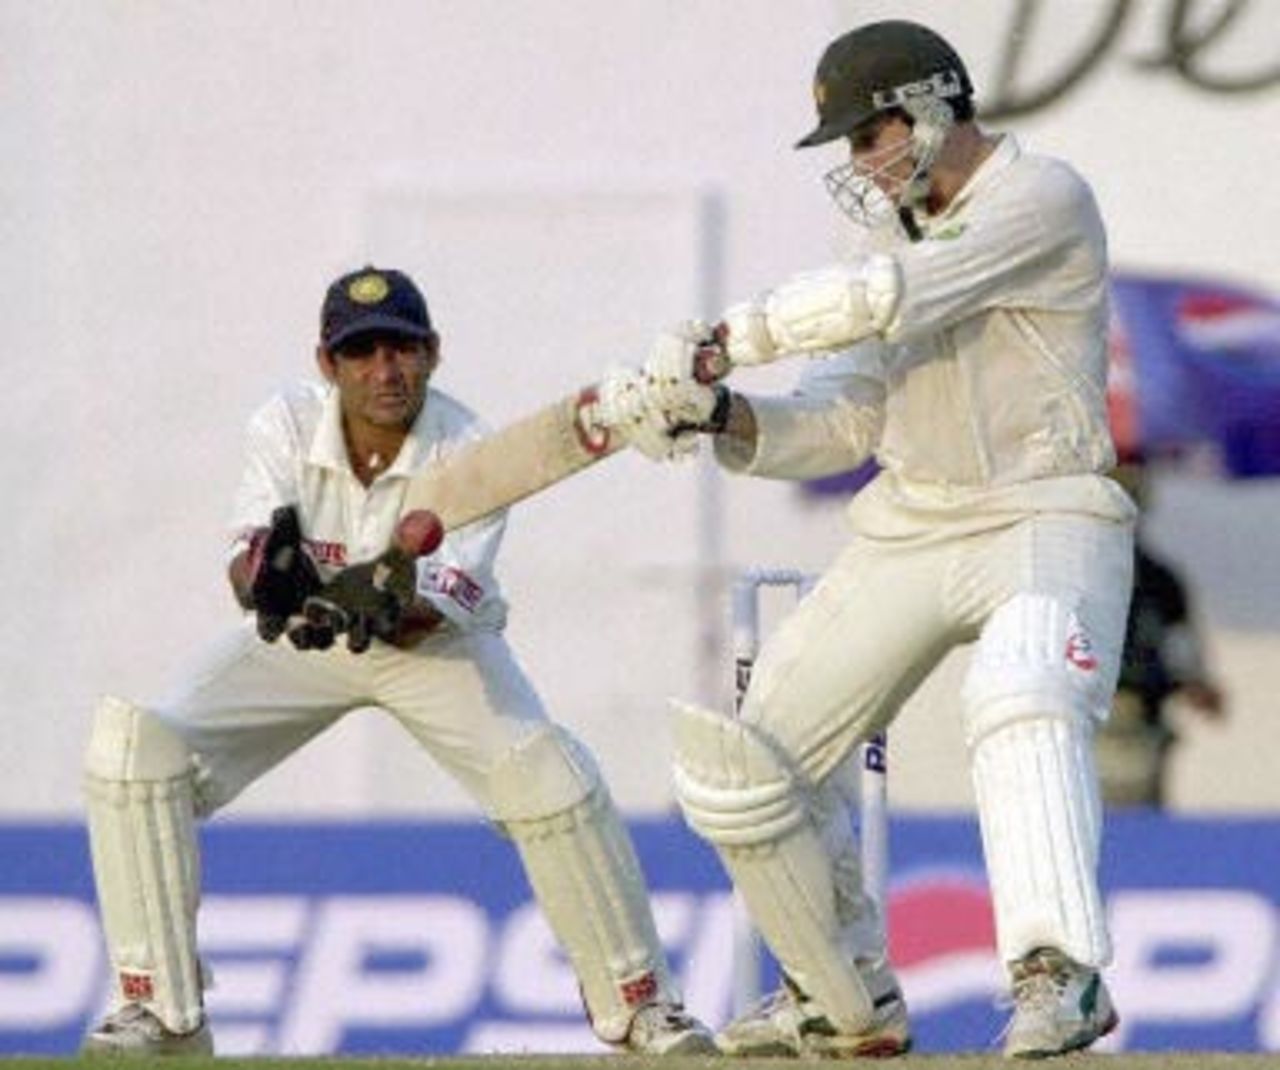 Zimbabwean batsman Guy Whittall hits a delivery from Indian spinner Sunil Joshi as Indian wicketkeeper Vijay Dahiya (L) looks on during the second day of the second Test match between India and Zimbabwe, 26 November 2000 in Nagpur. Whittall, the highest scorer for Zimbabwe, remained unbeaten at 34 as Zimbabwe scored 59 for 1 in reply to India's total of 609 runs at the end of day's play.